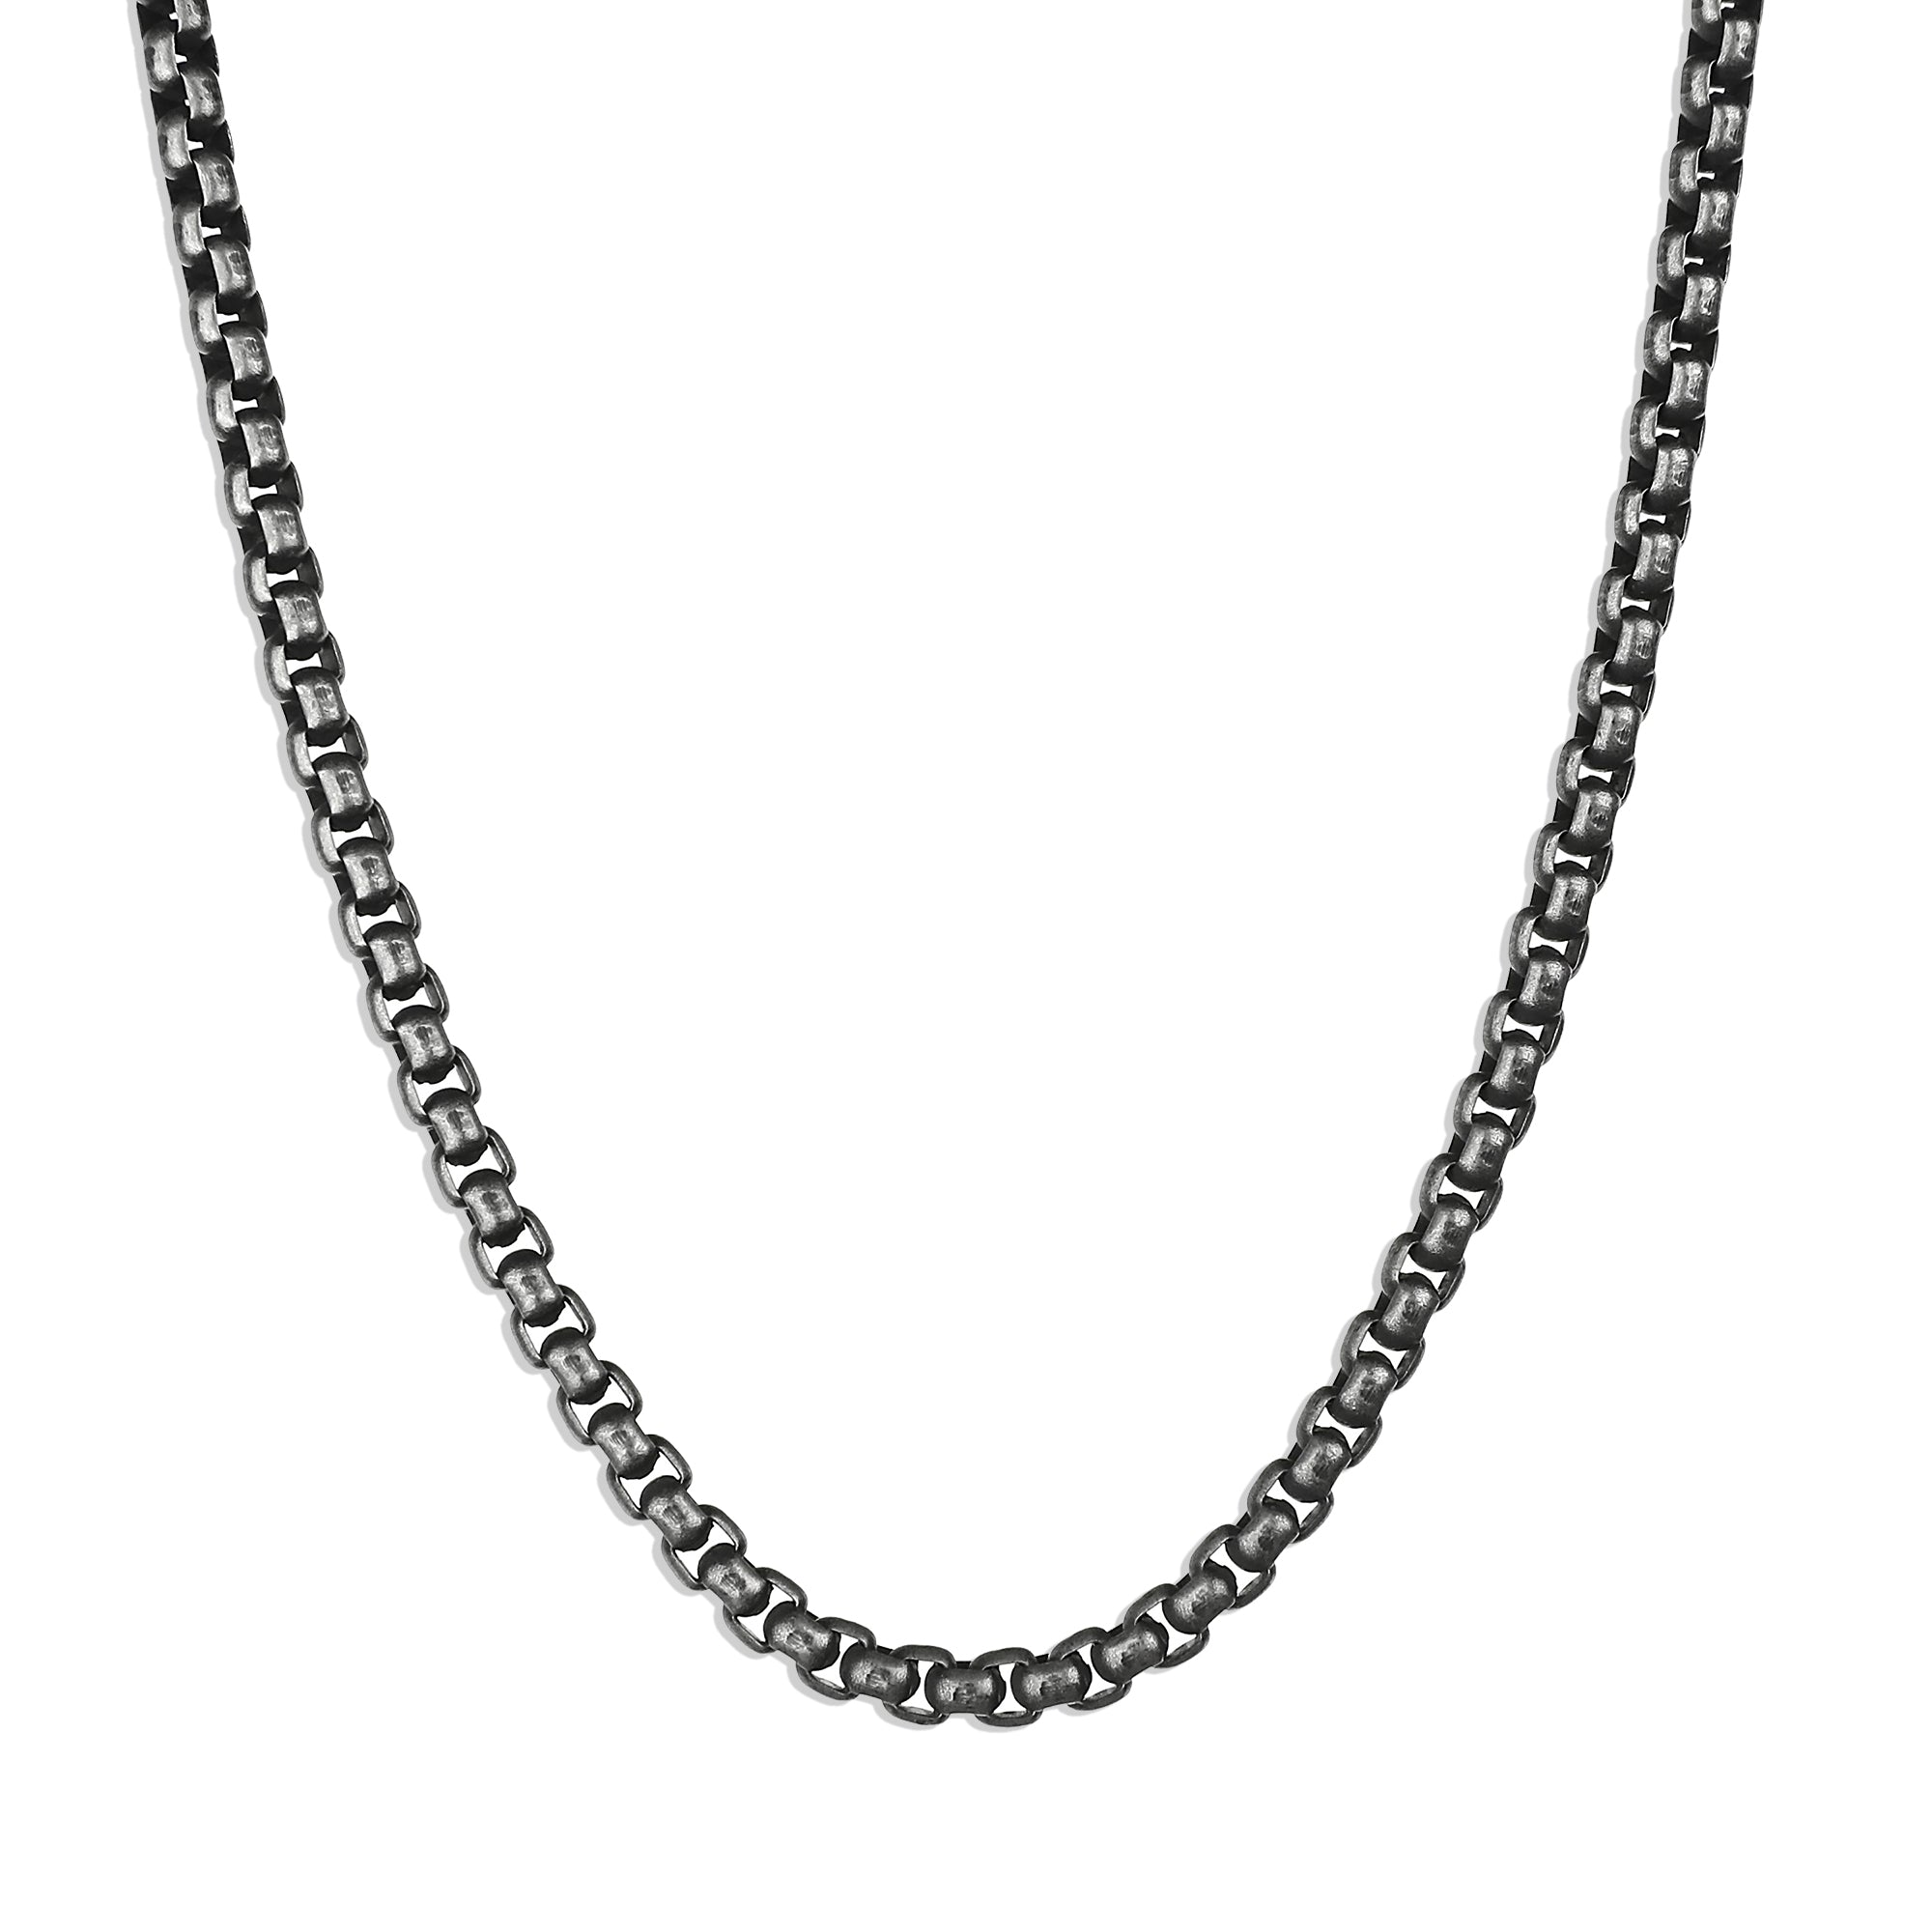 Box Chain Necklace - Aged Silver 3.5mm